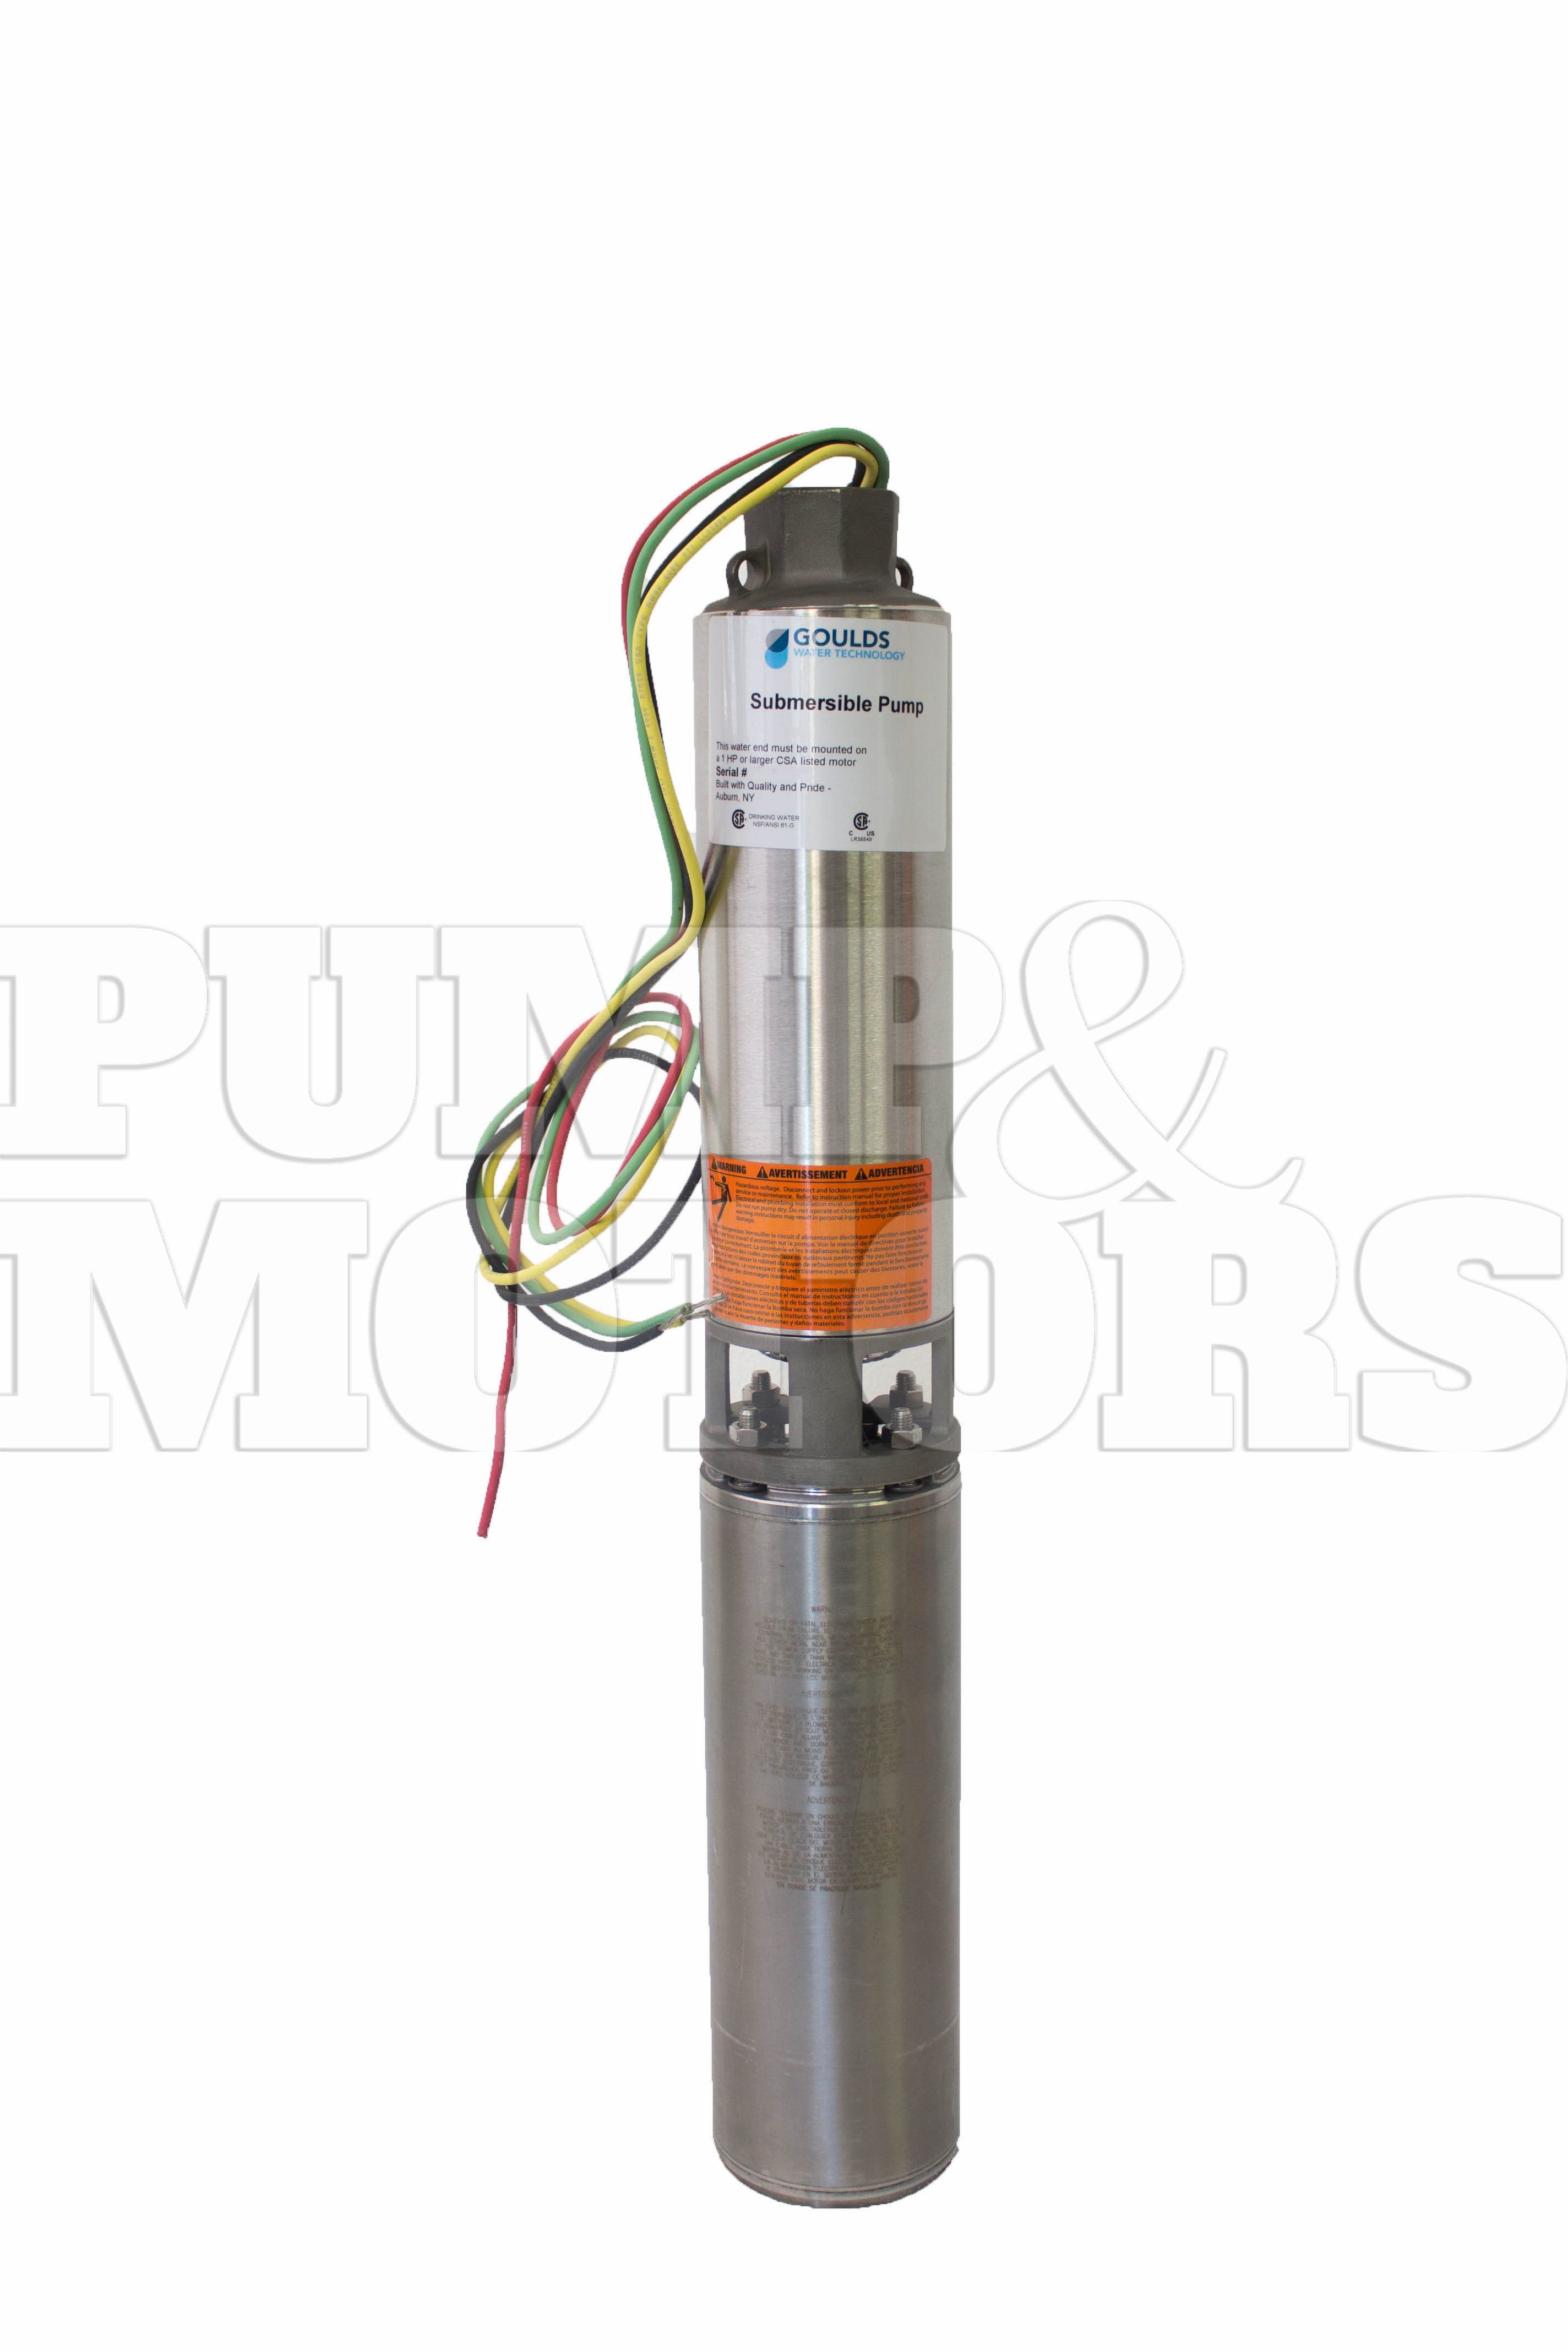 Goulds 33GS20430C 2HP Submersible Water Well Pump & Motor 200V